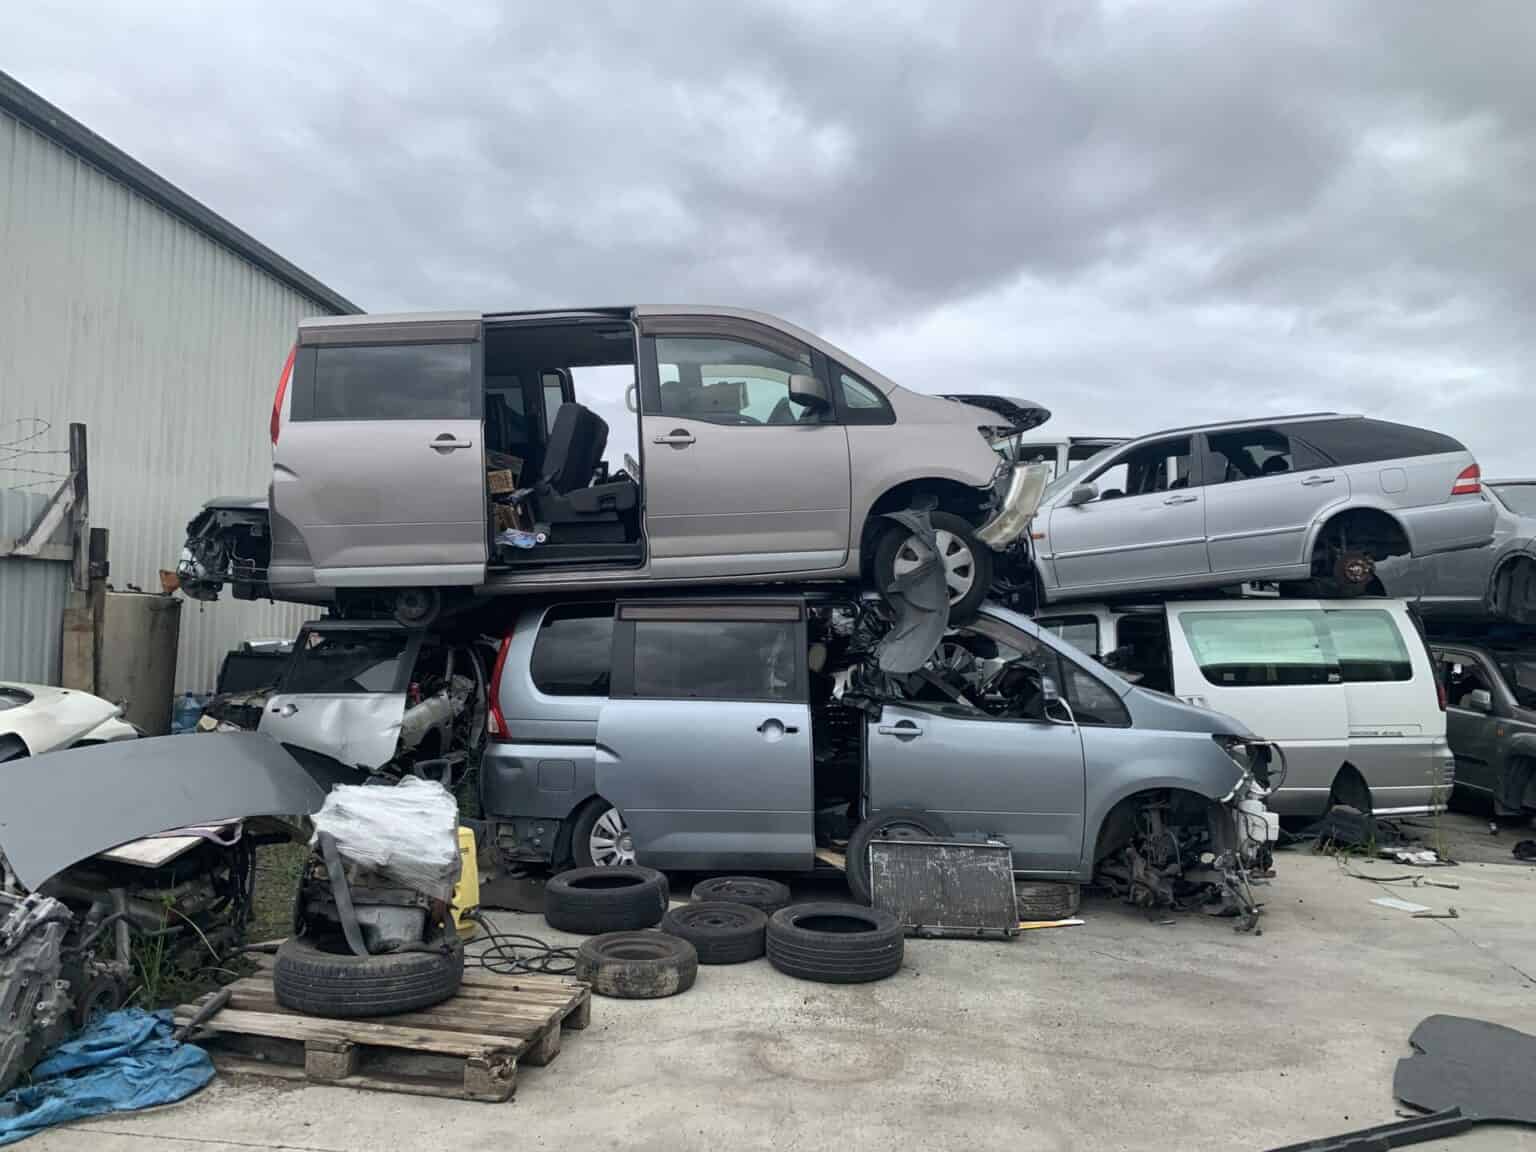 Broken Car Collection Auckland: Sell Dead Vehicles To Us